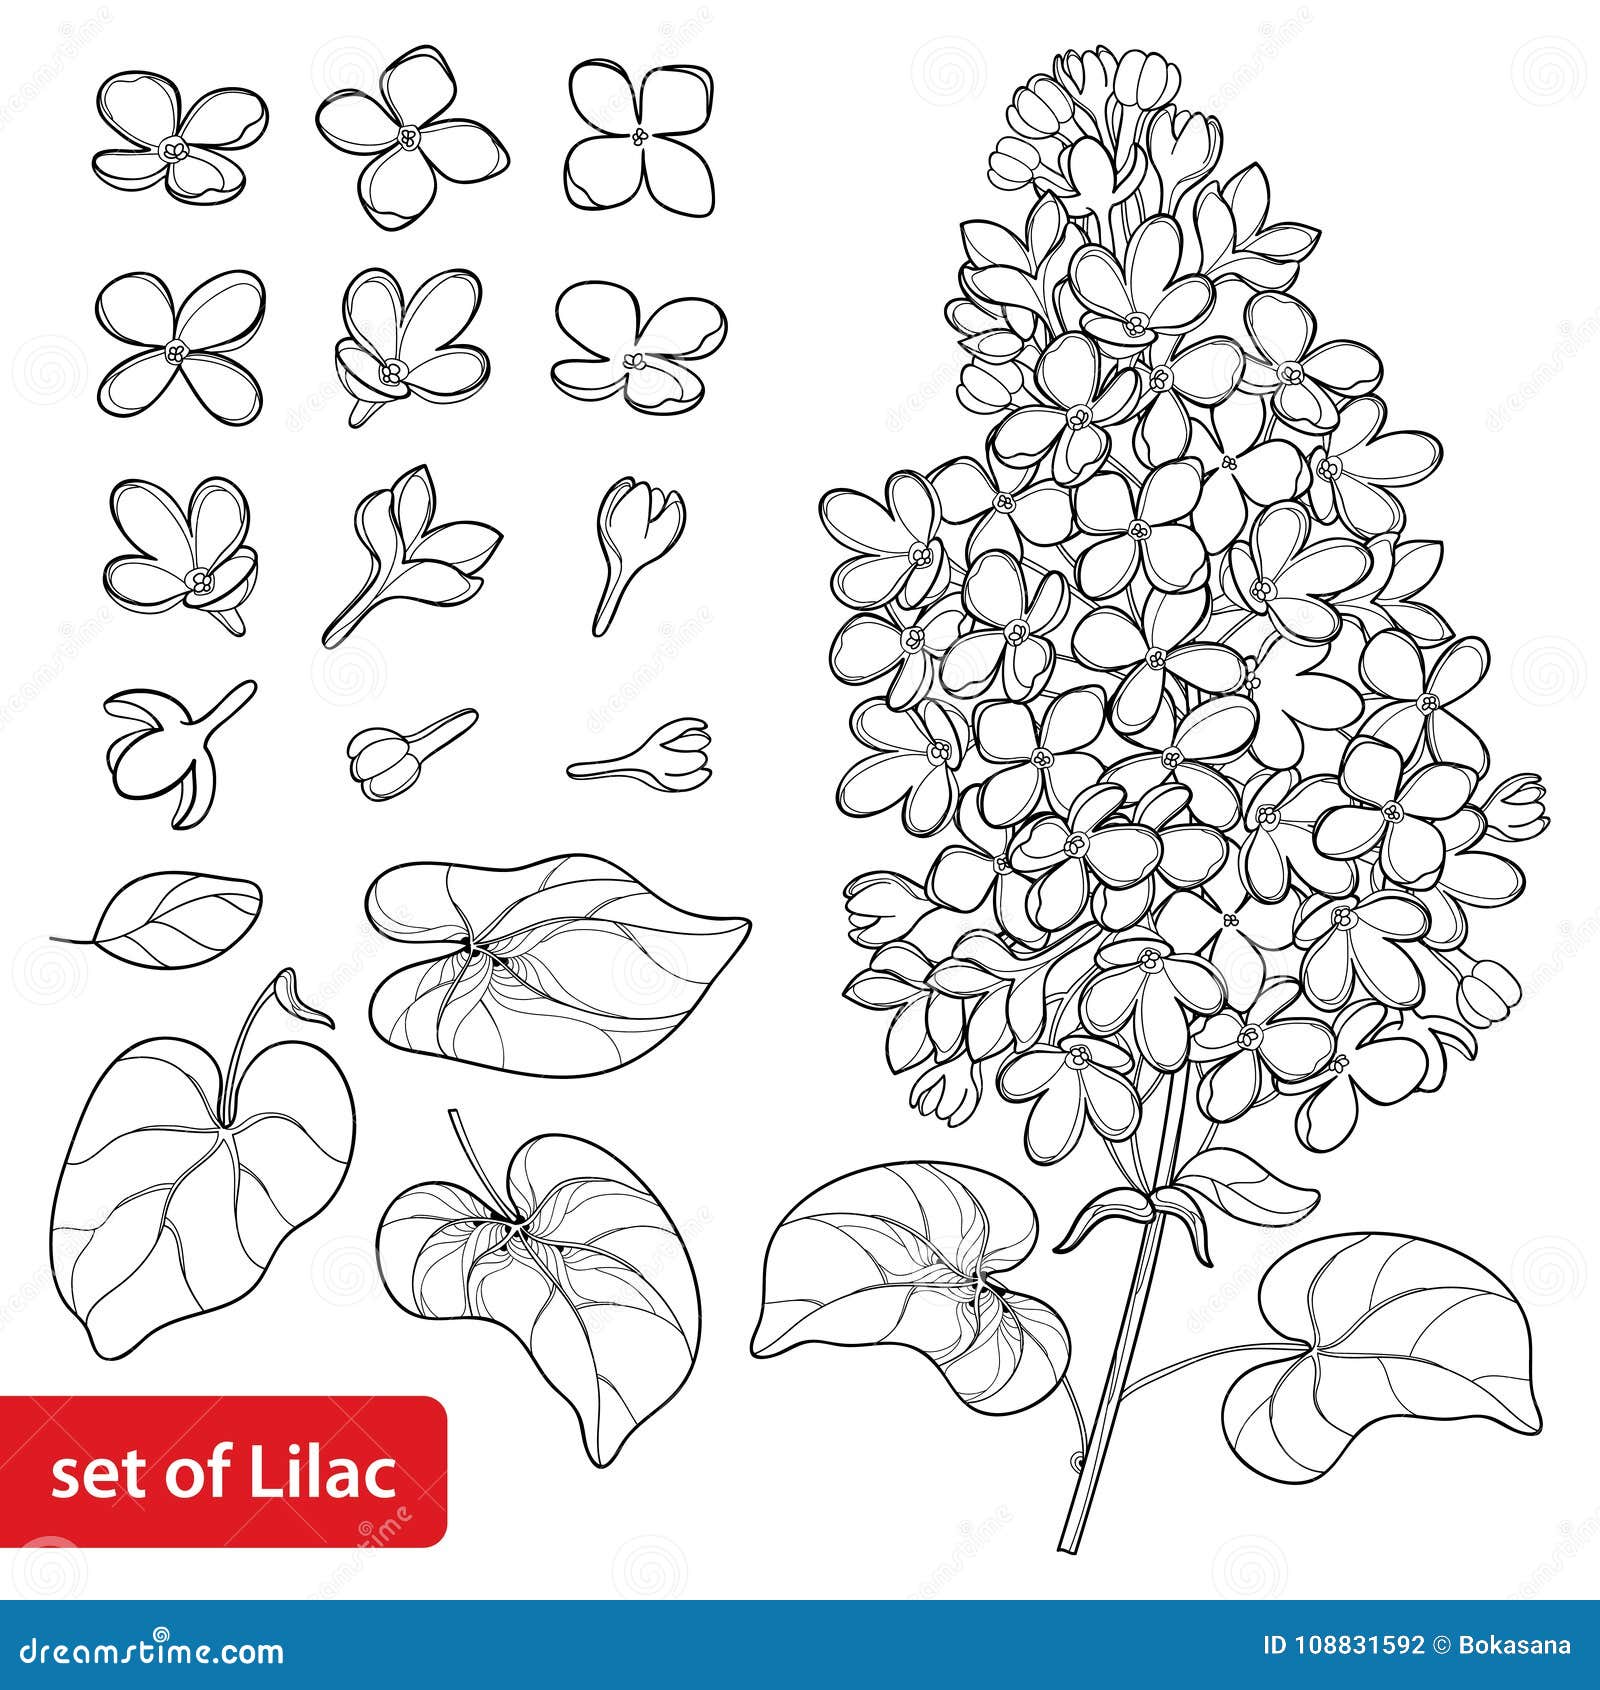 Lilac coloring stock illustrations â lilac coloring stock illustrations vectors clipart